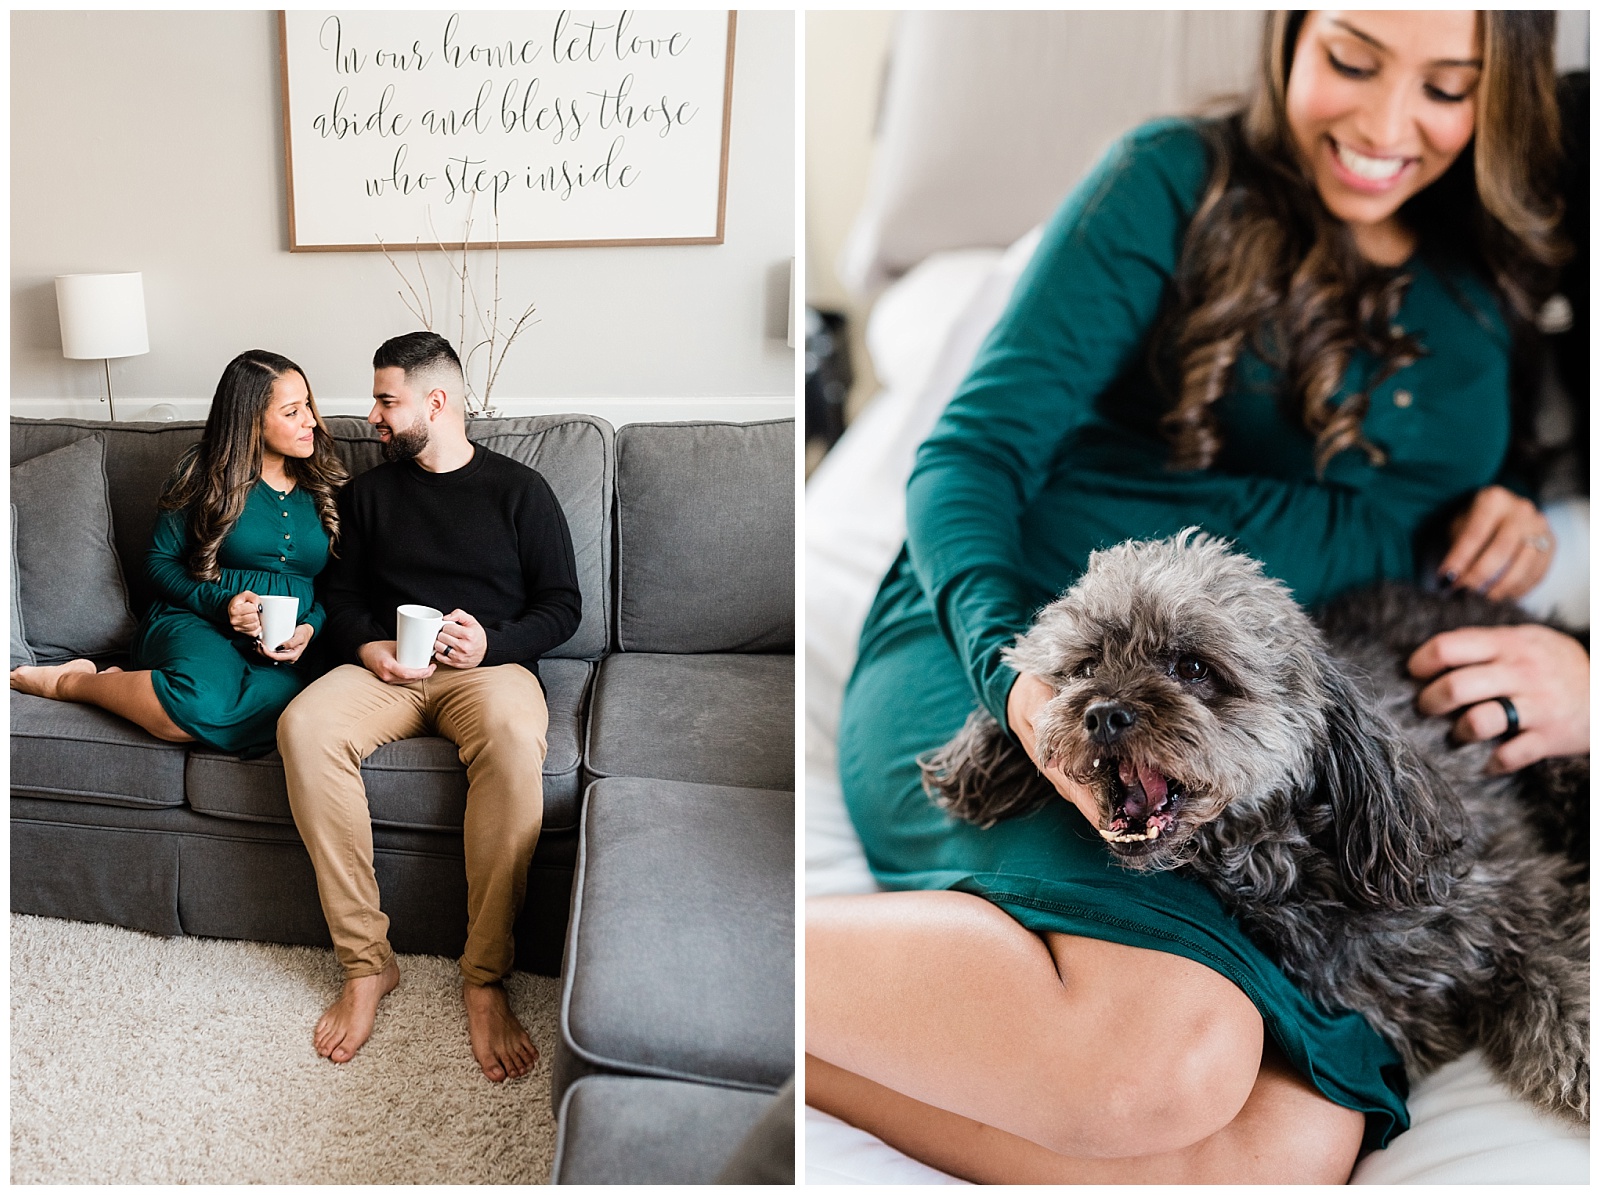 In Home Maternity Session, Nursery, Baby, New Parents, Maternity Shoot, Pregnant, Pregnancy Photos, New Jersey, Photographer, Baby Boy, Dog, pet, Coffee, couch, Photo